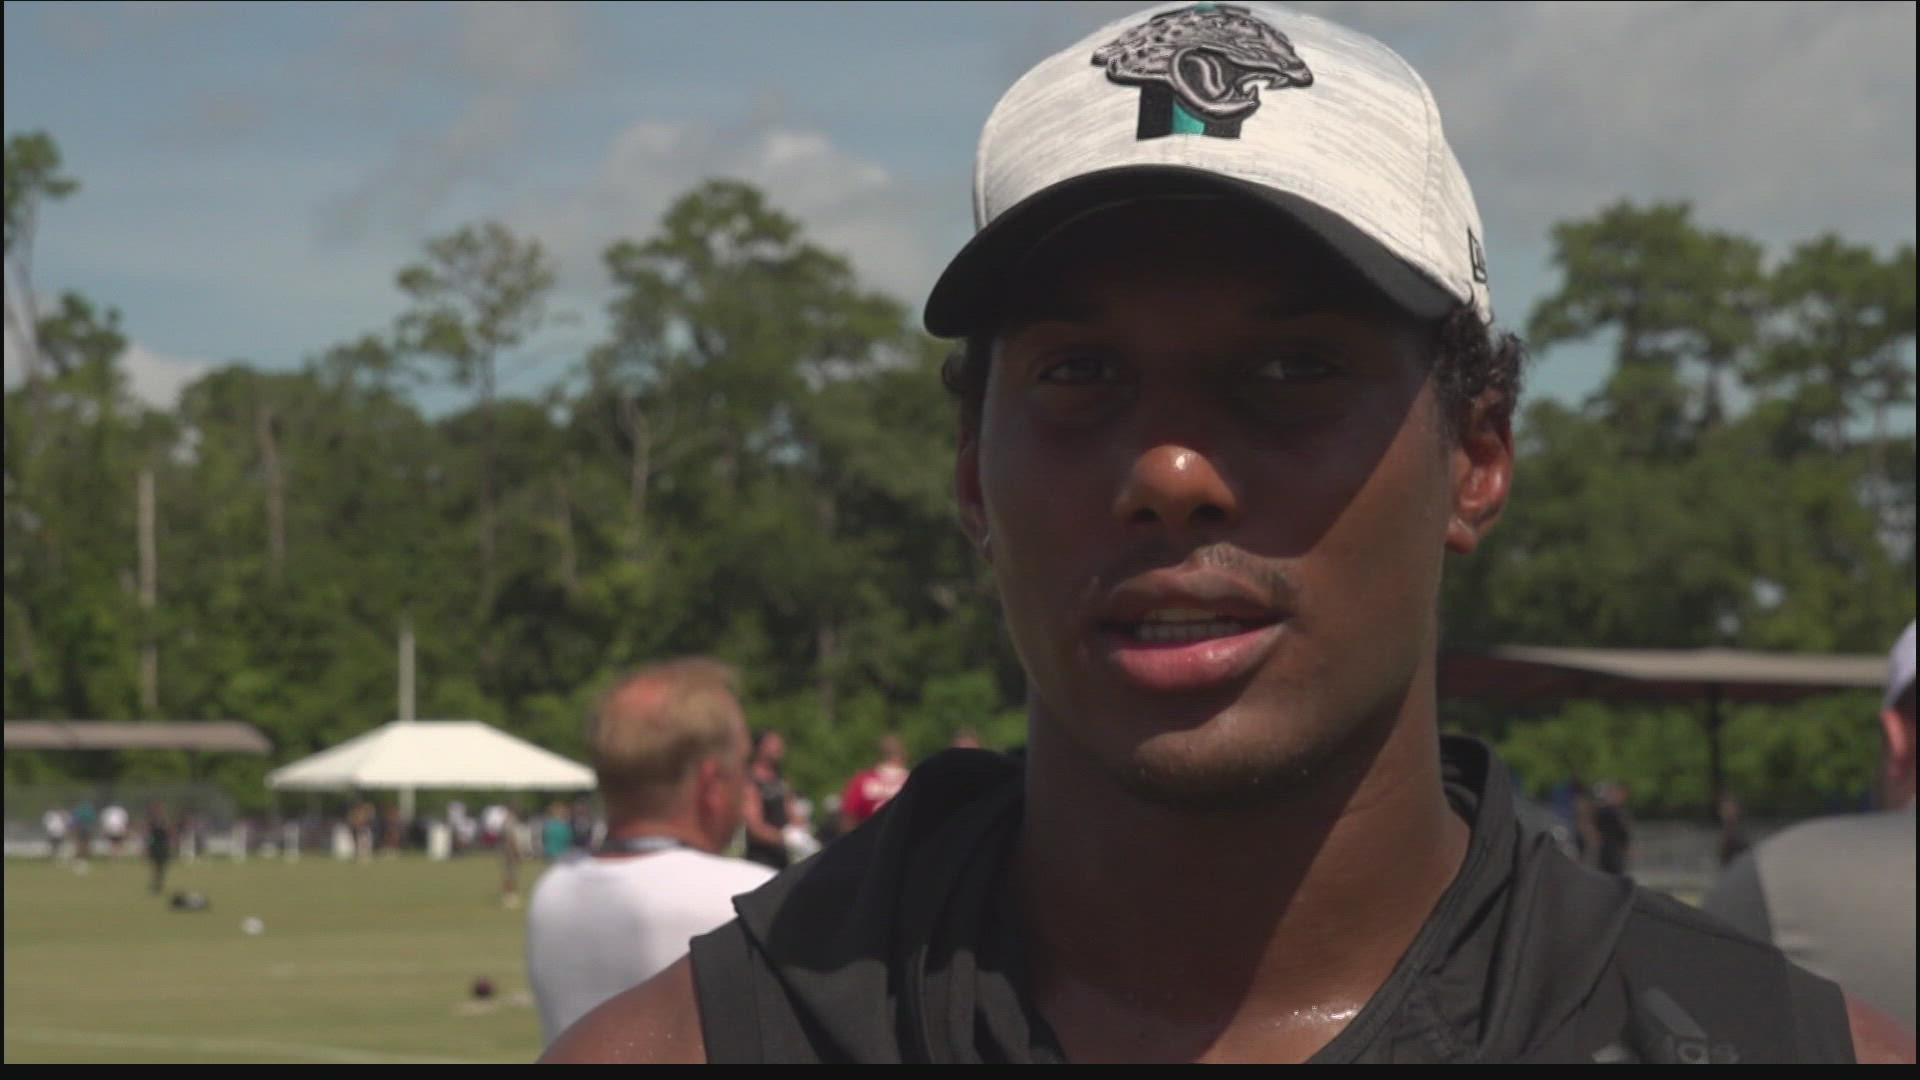 The Jaguars defense put out the clampdown having a great day a camp. Zay has his say, and looks forward to the season.